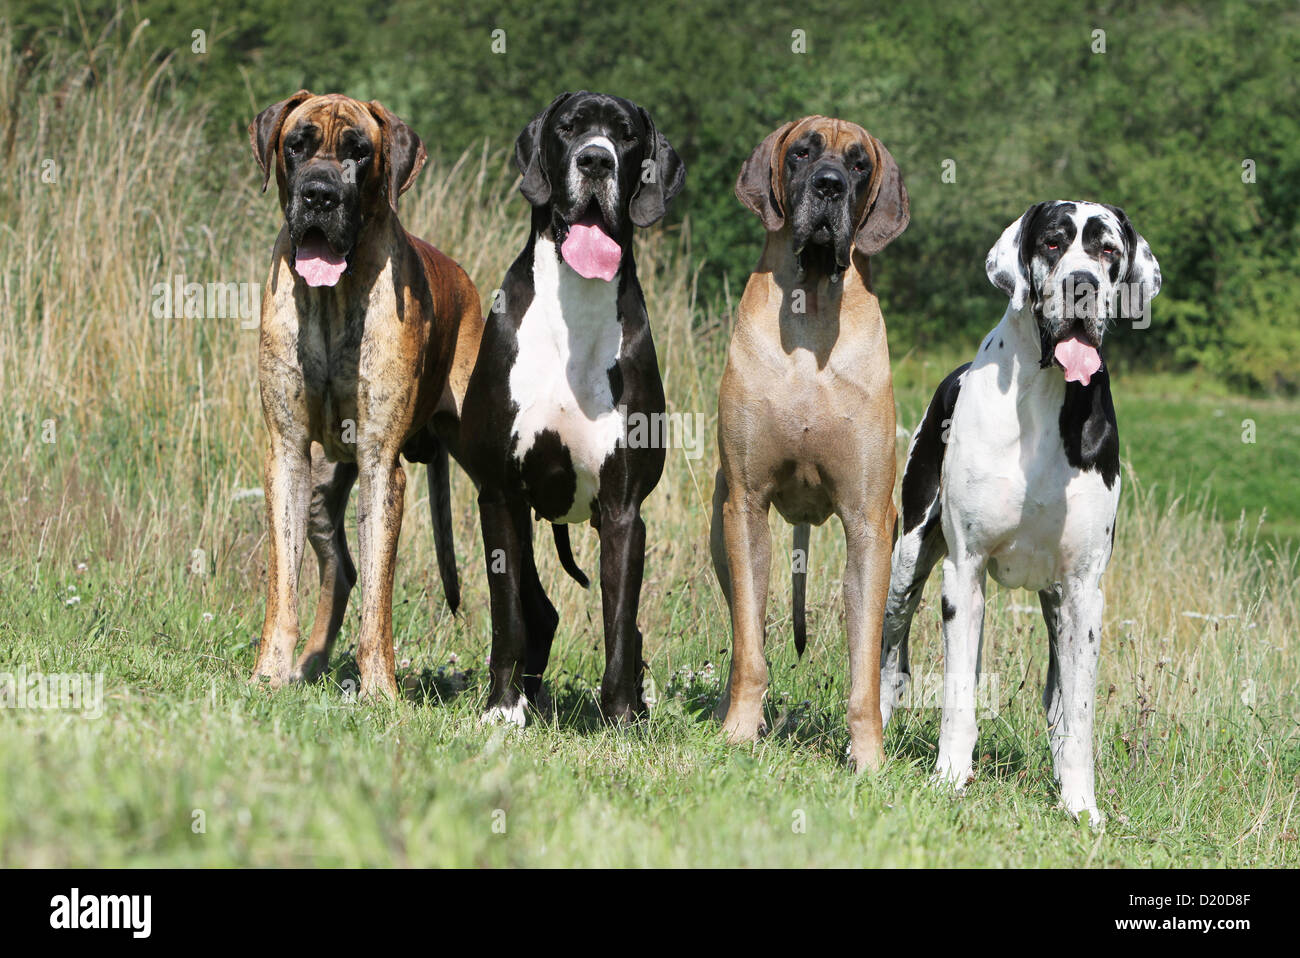 Dog Great Dane / Deutsche Dogge four adults different colors standing (brindle - black - fawn - harlequin) Stock Photo